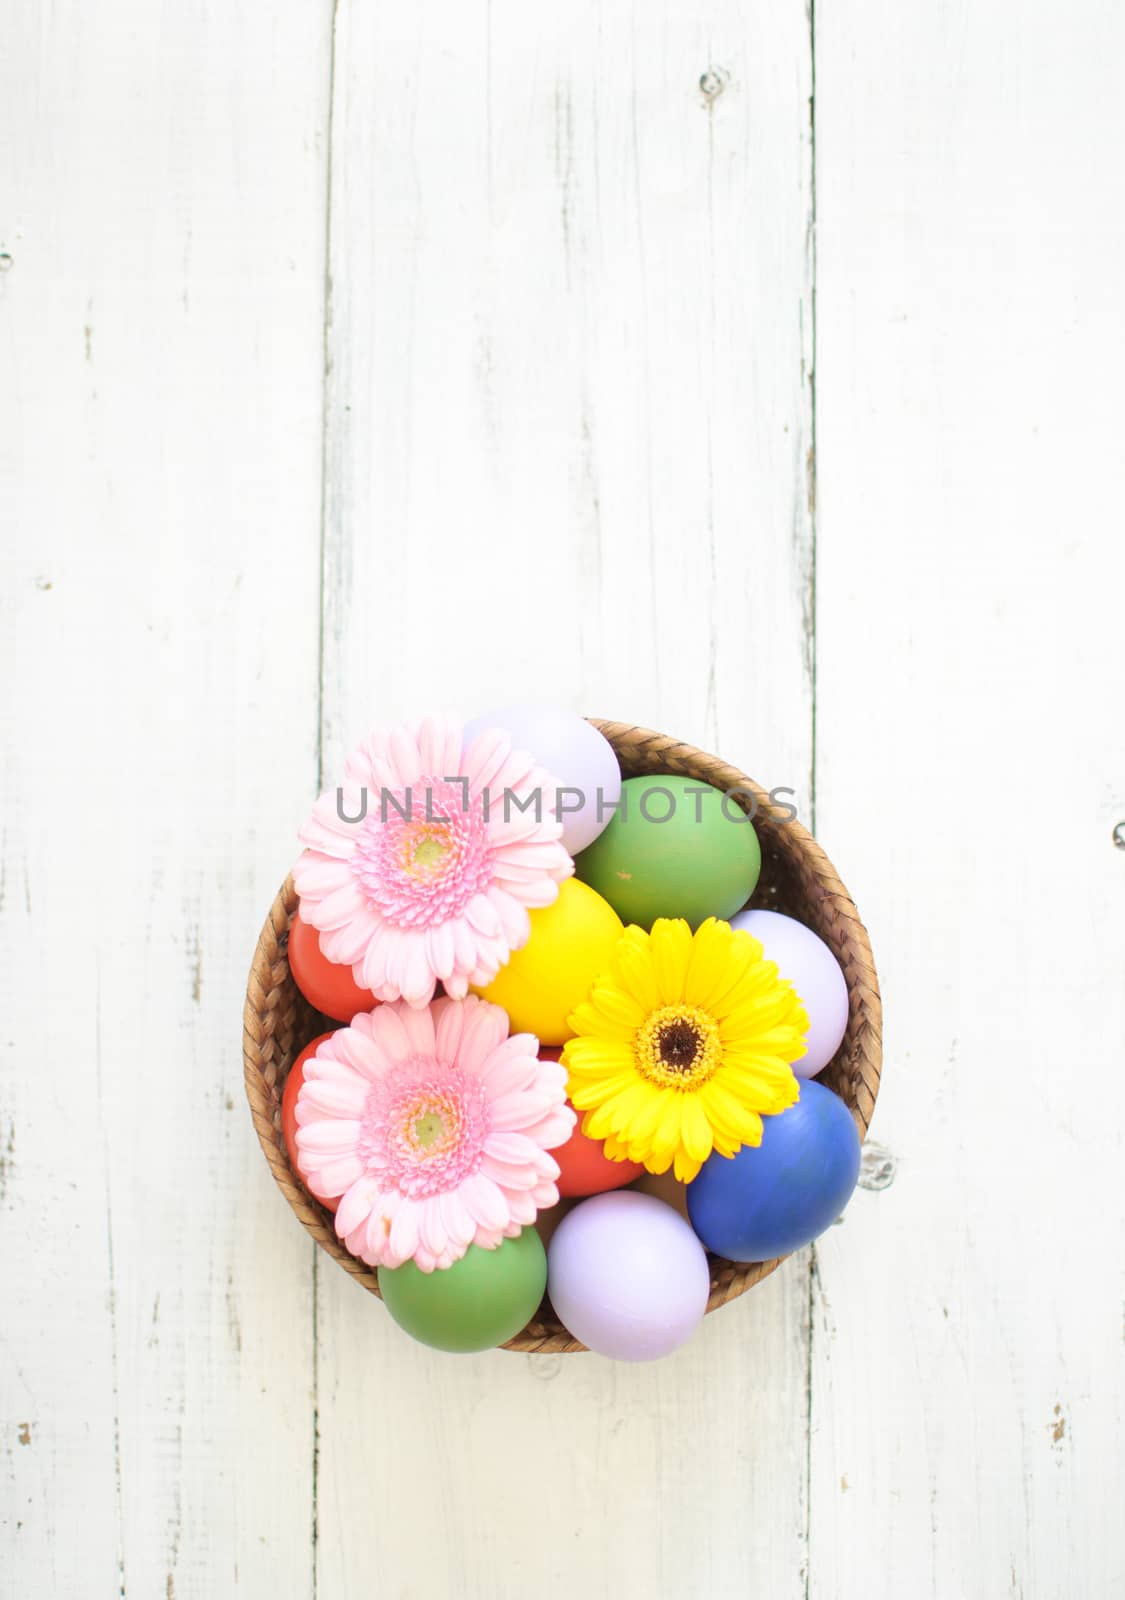 Easter eggs inside a wicker basket with daisies